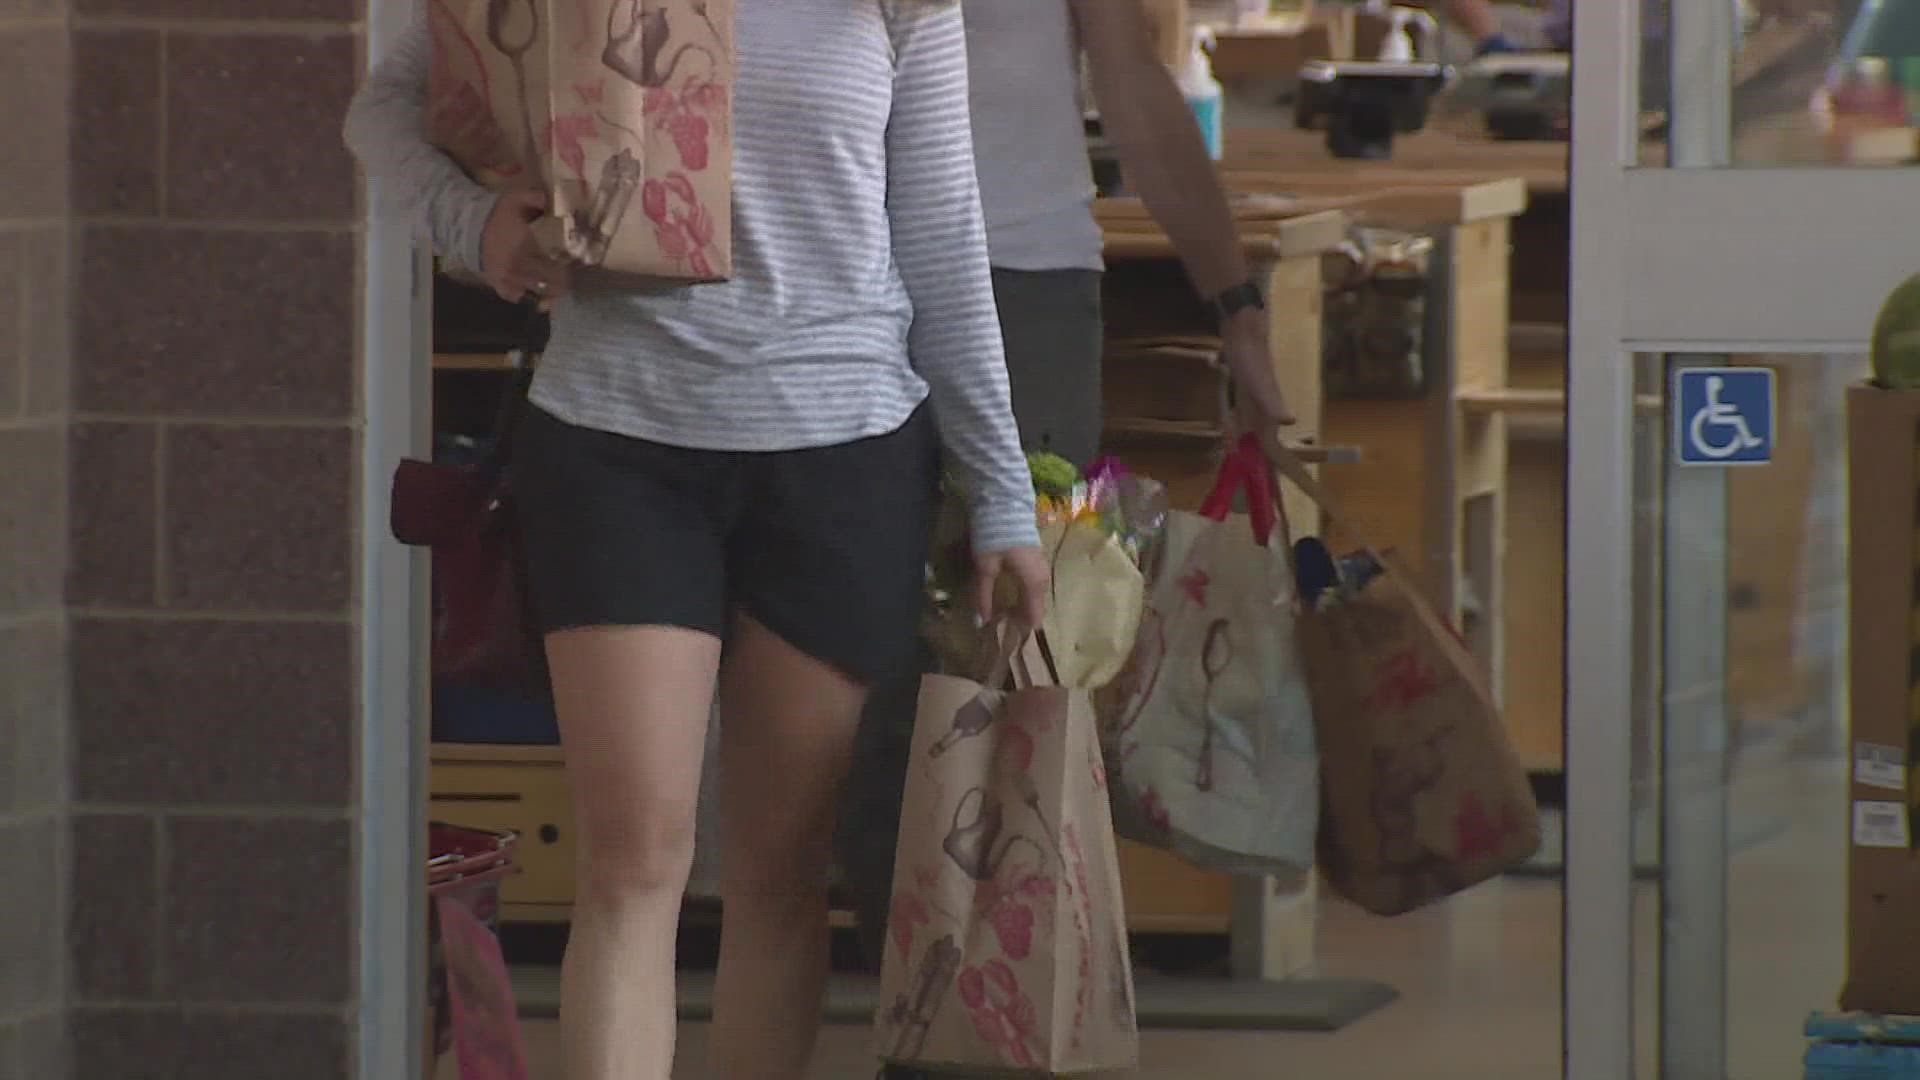 A city ordinance going into effect May 1 bans plastic bags at grocers larger than 10,000 square feet. Paper bags will be available for 10 cents each.